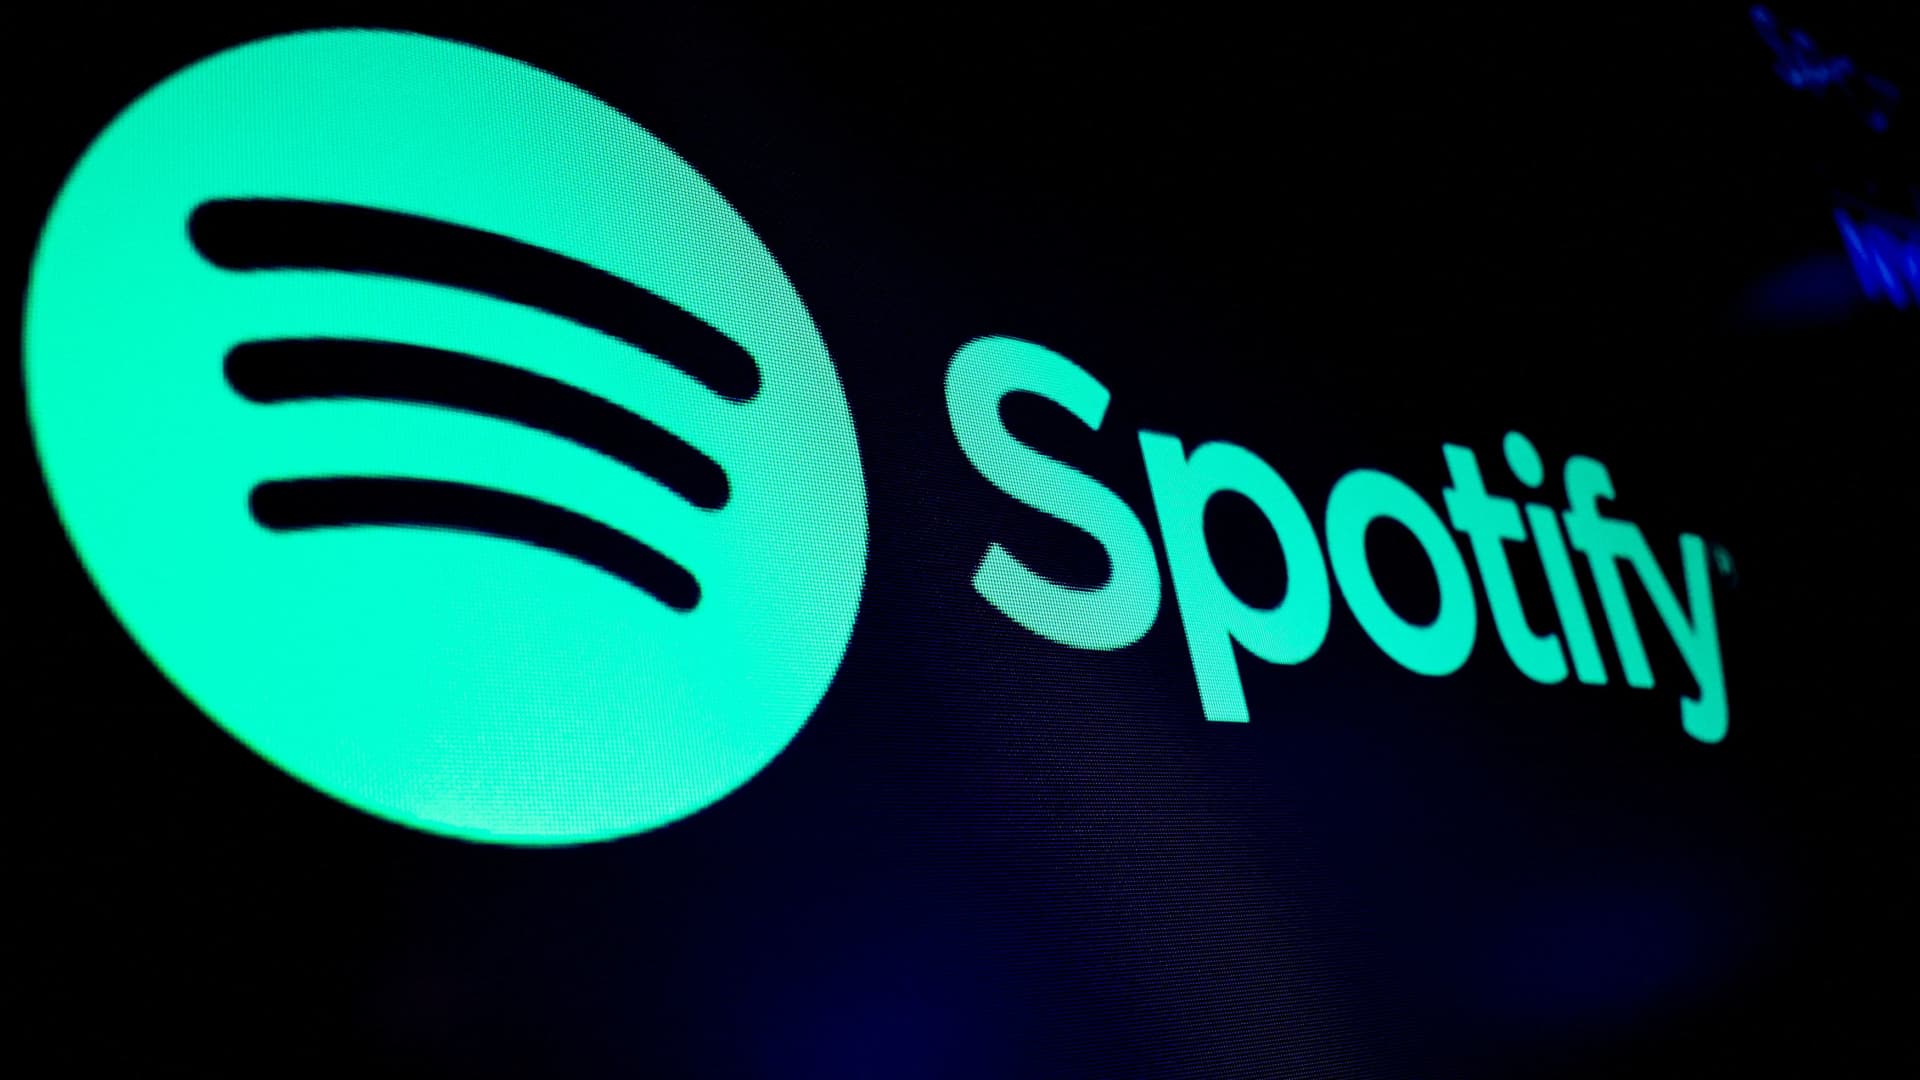 Spotify plans to raise prices: Report